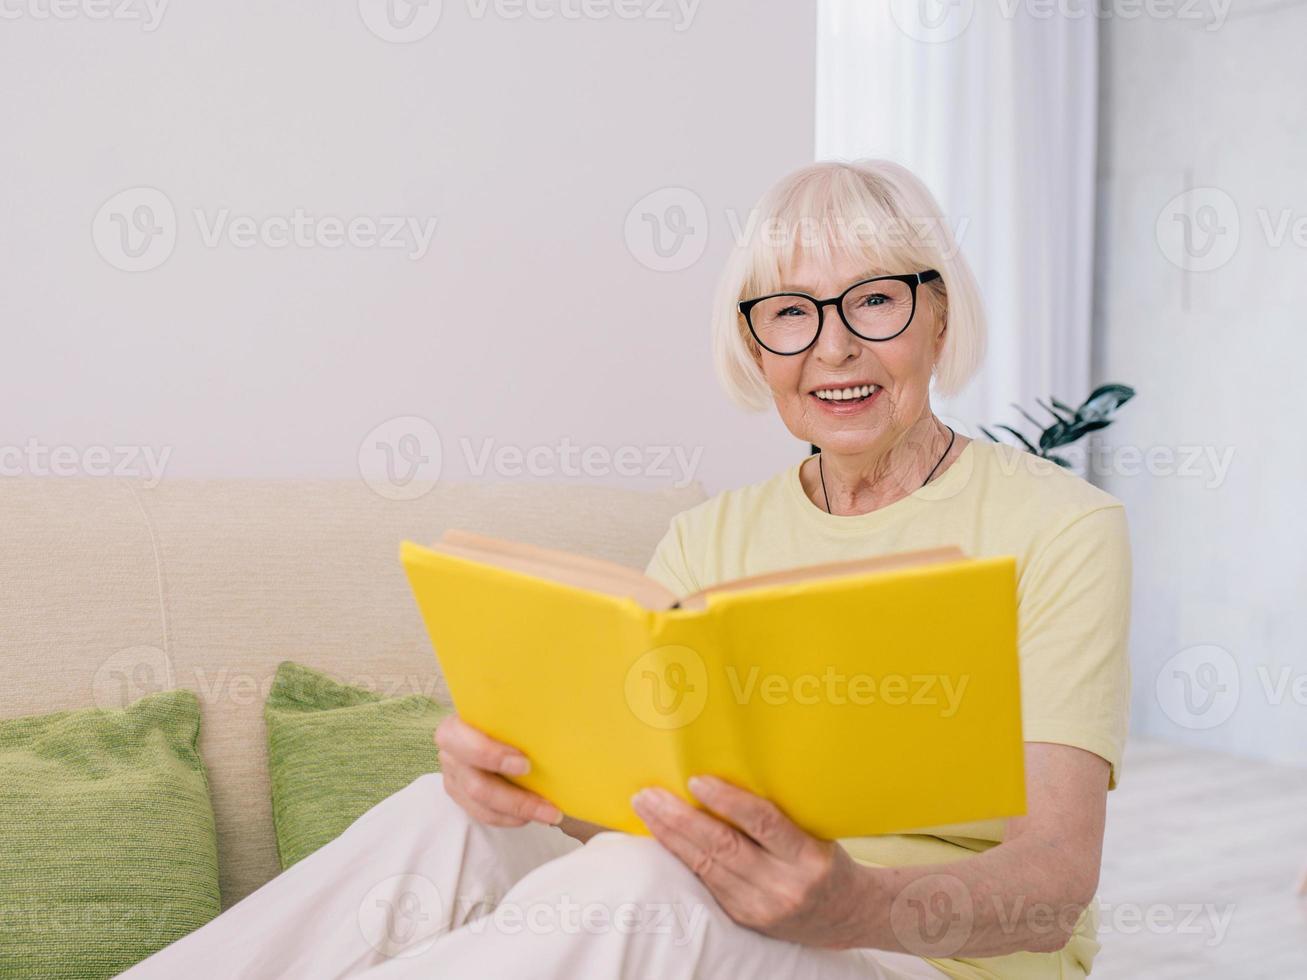 senior woman with gray hair reading a book on a sofa at home. Education, pension, anti age, reading concept photo